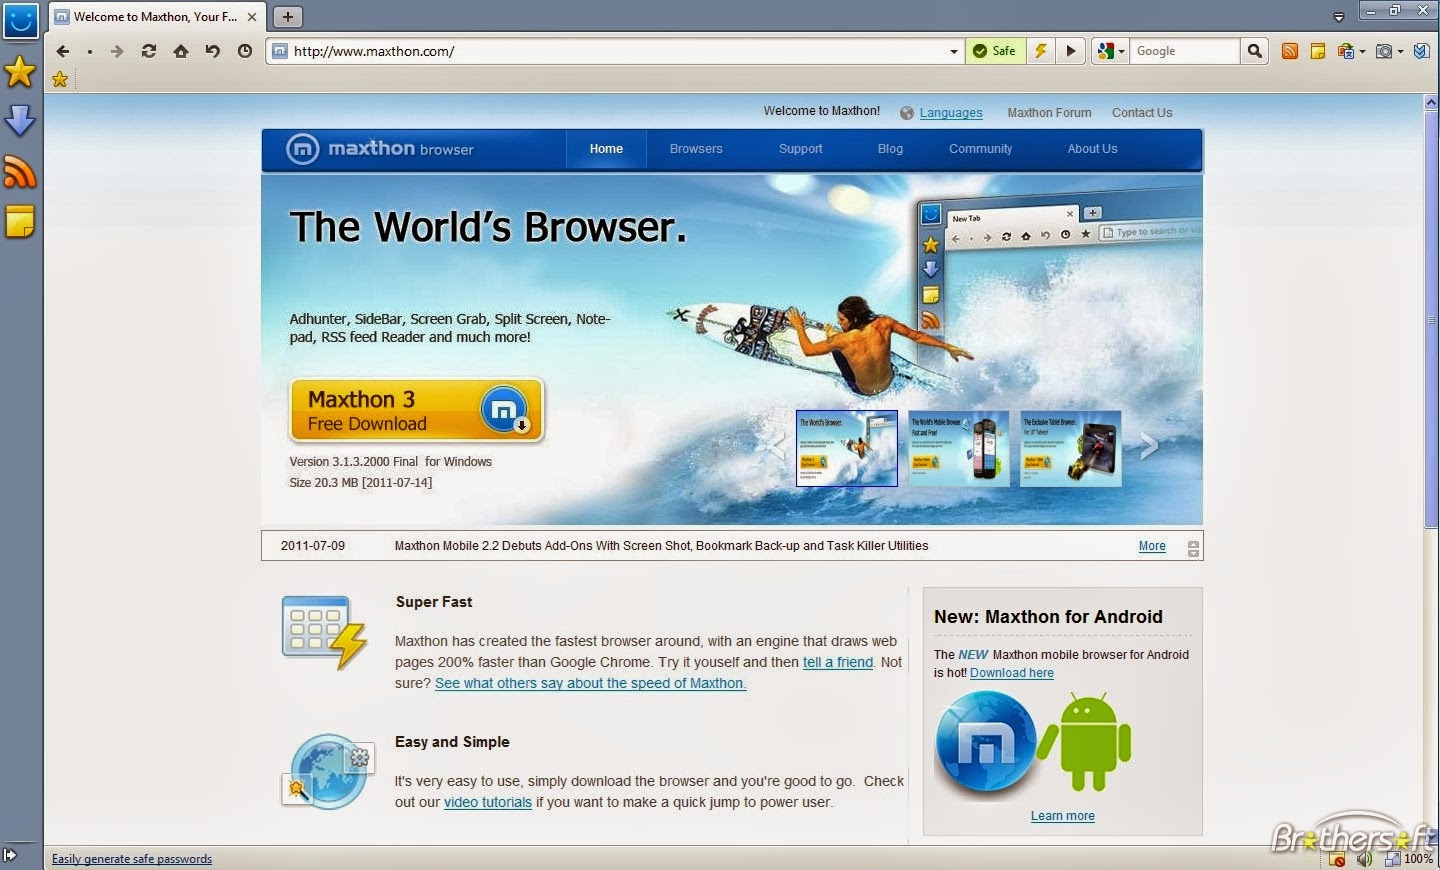 Free Download Maxthon 3 Software